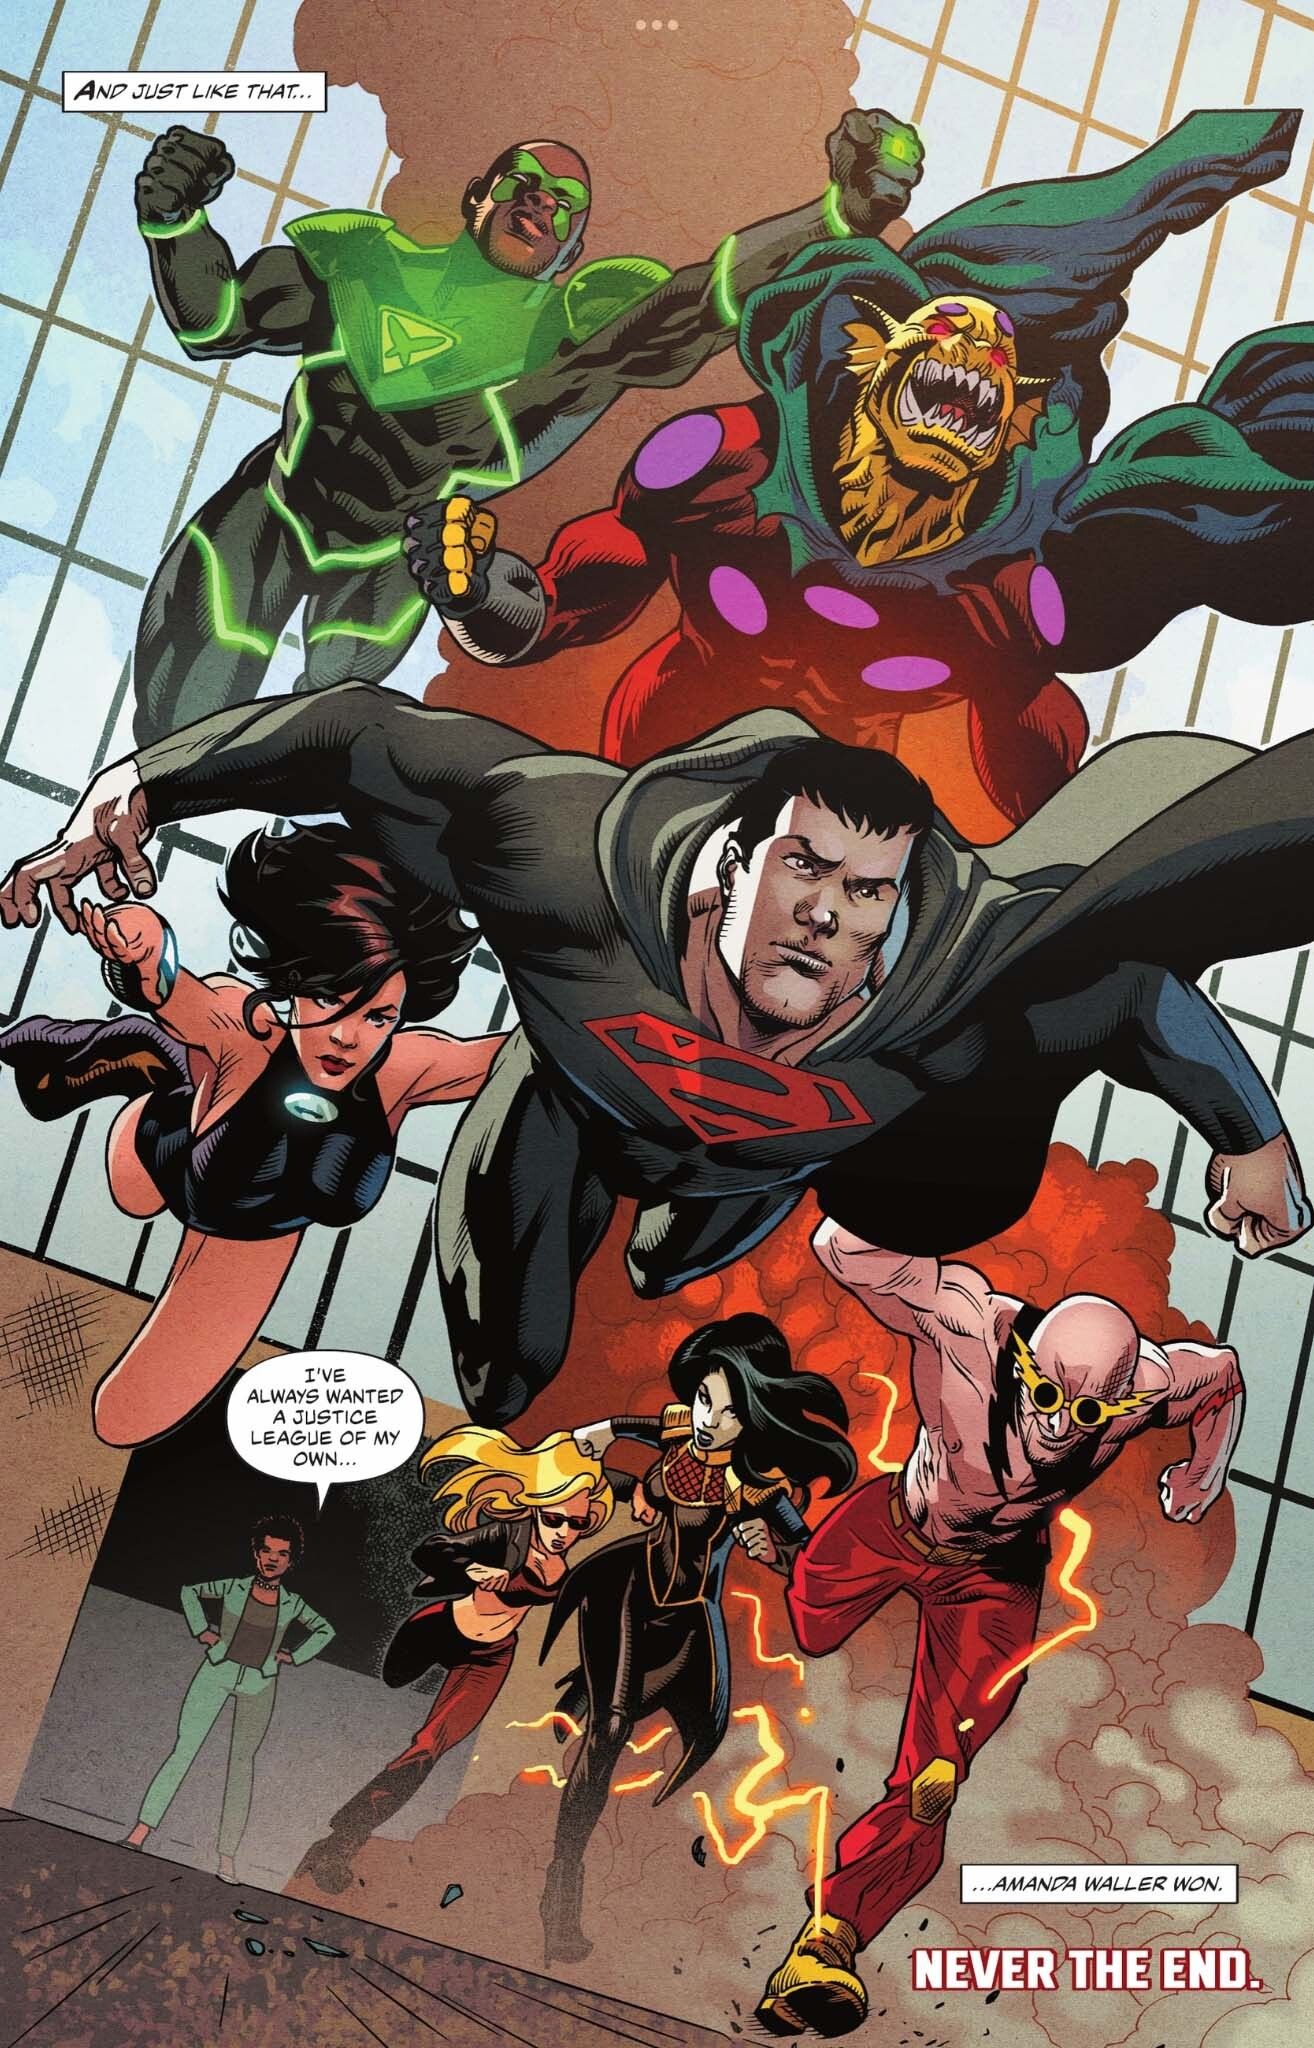 DC Introduces a New, Ridiculously Powerful Justice League - Under ...